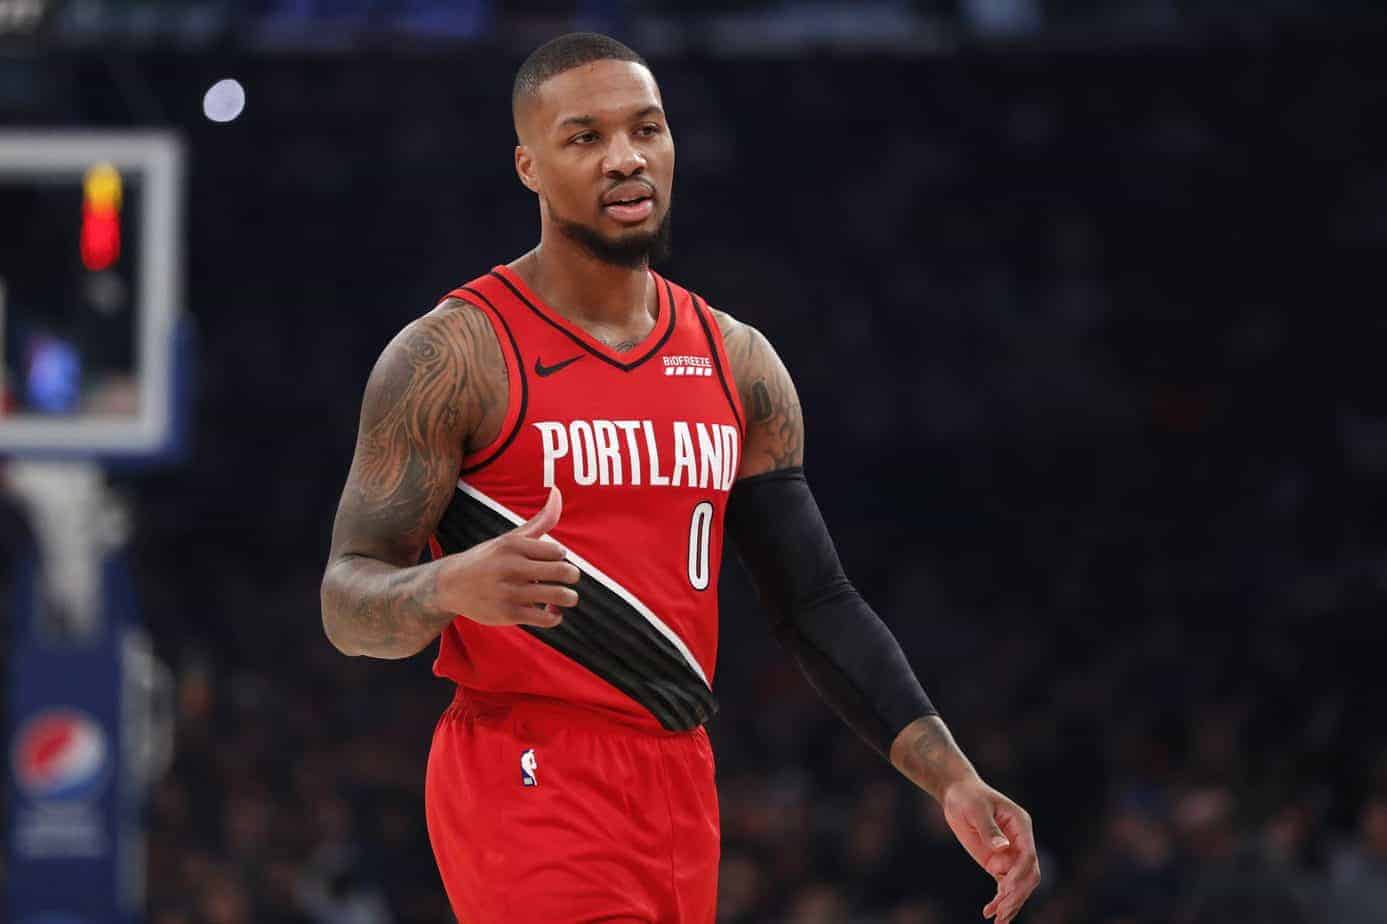 Awesemo's NBA DFS Injury News Updates, daily fantasy basketball rankings and contrarian GPP picks for DraftKings & FanDuel Friday, 12/31/21